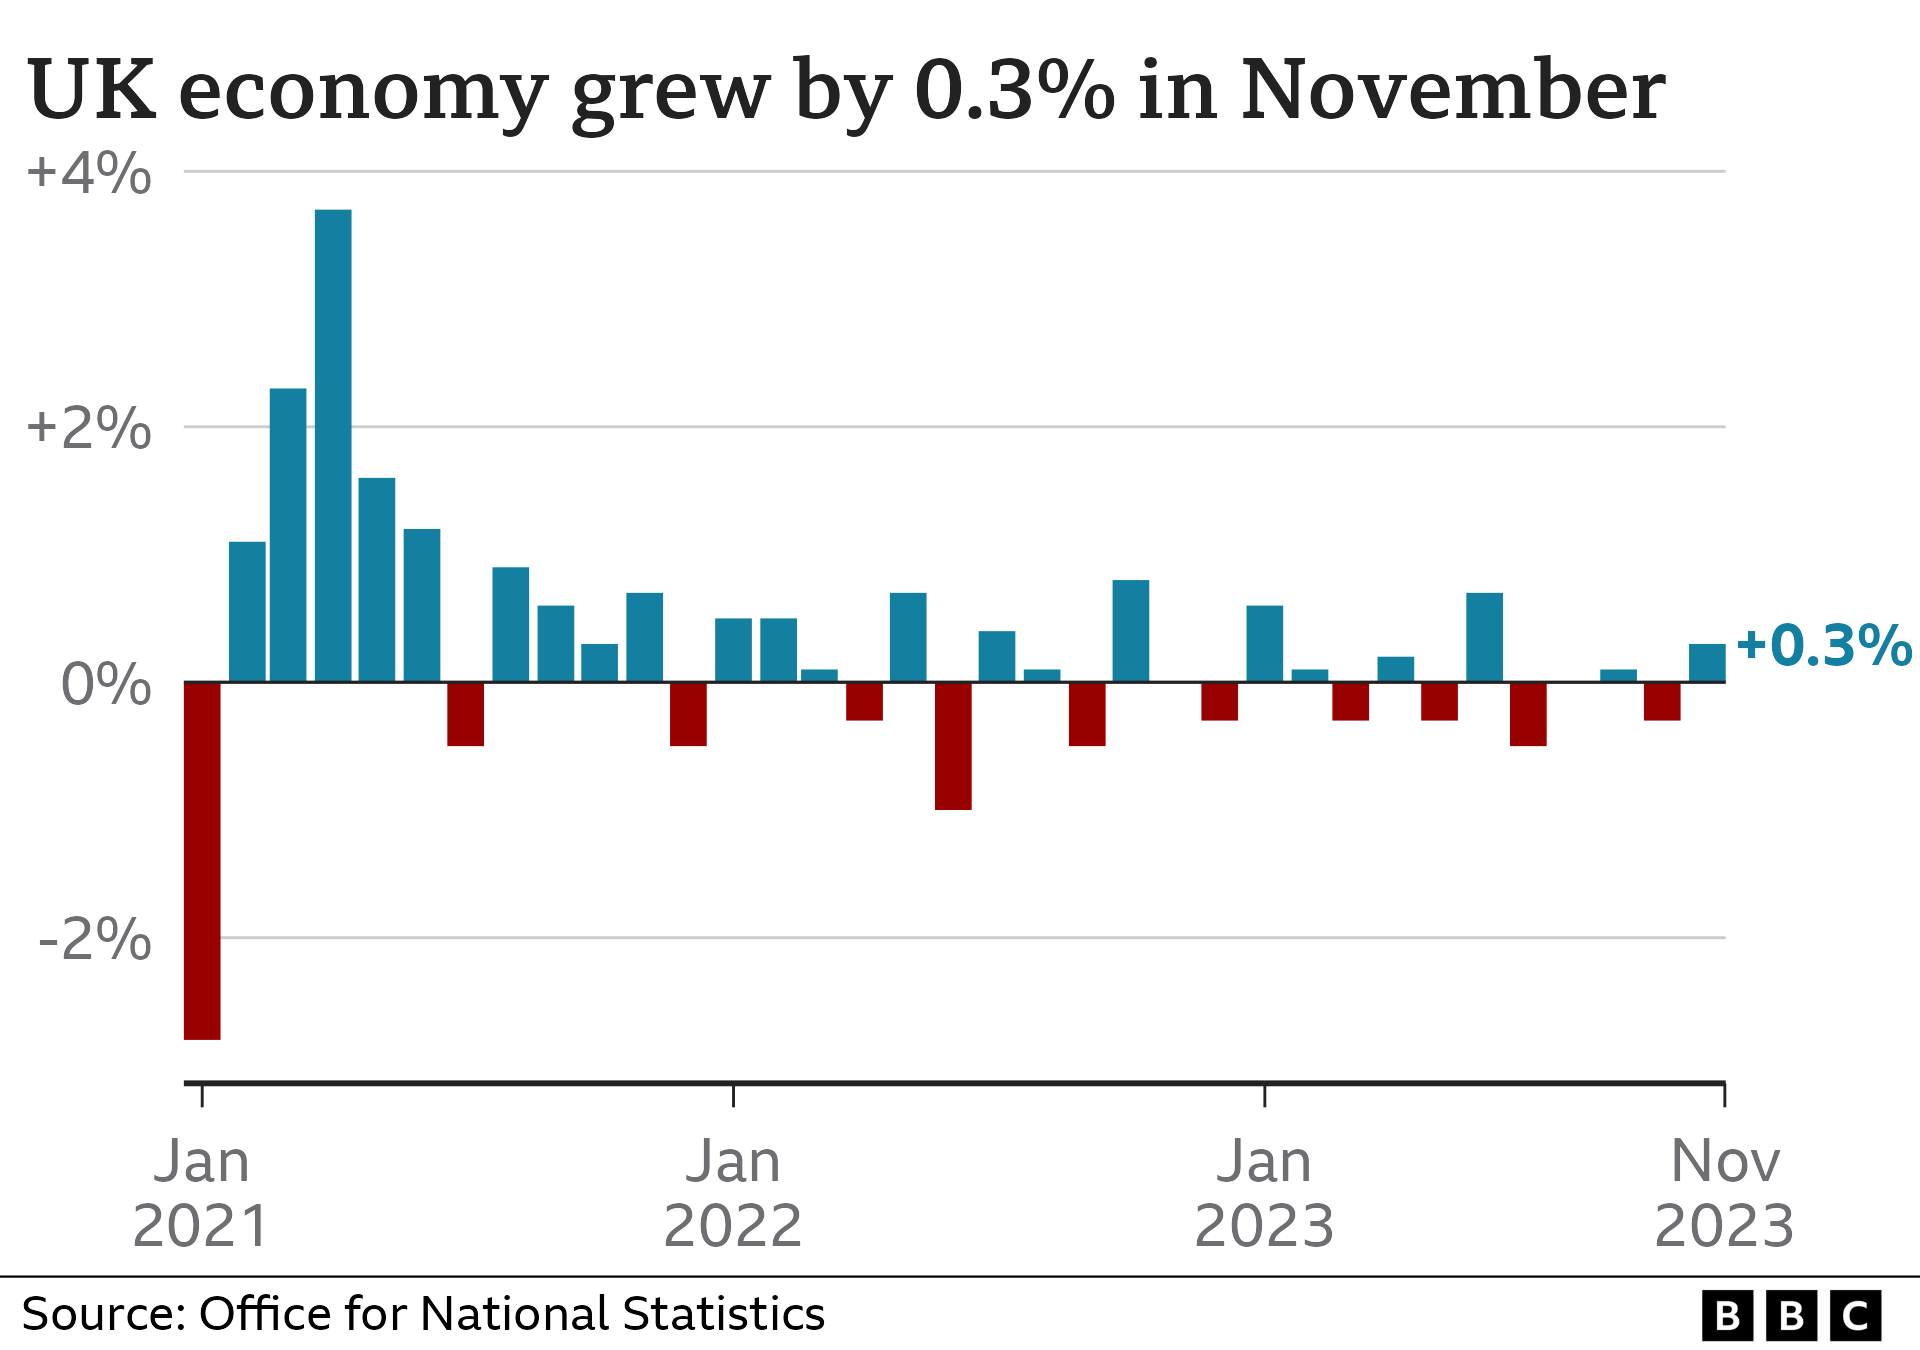 Bar chart showing the growth of the UK economy. In November, it is estimated to have grown by 0.3%.